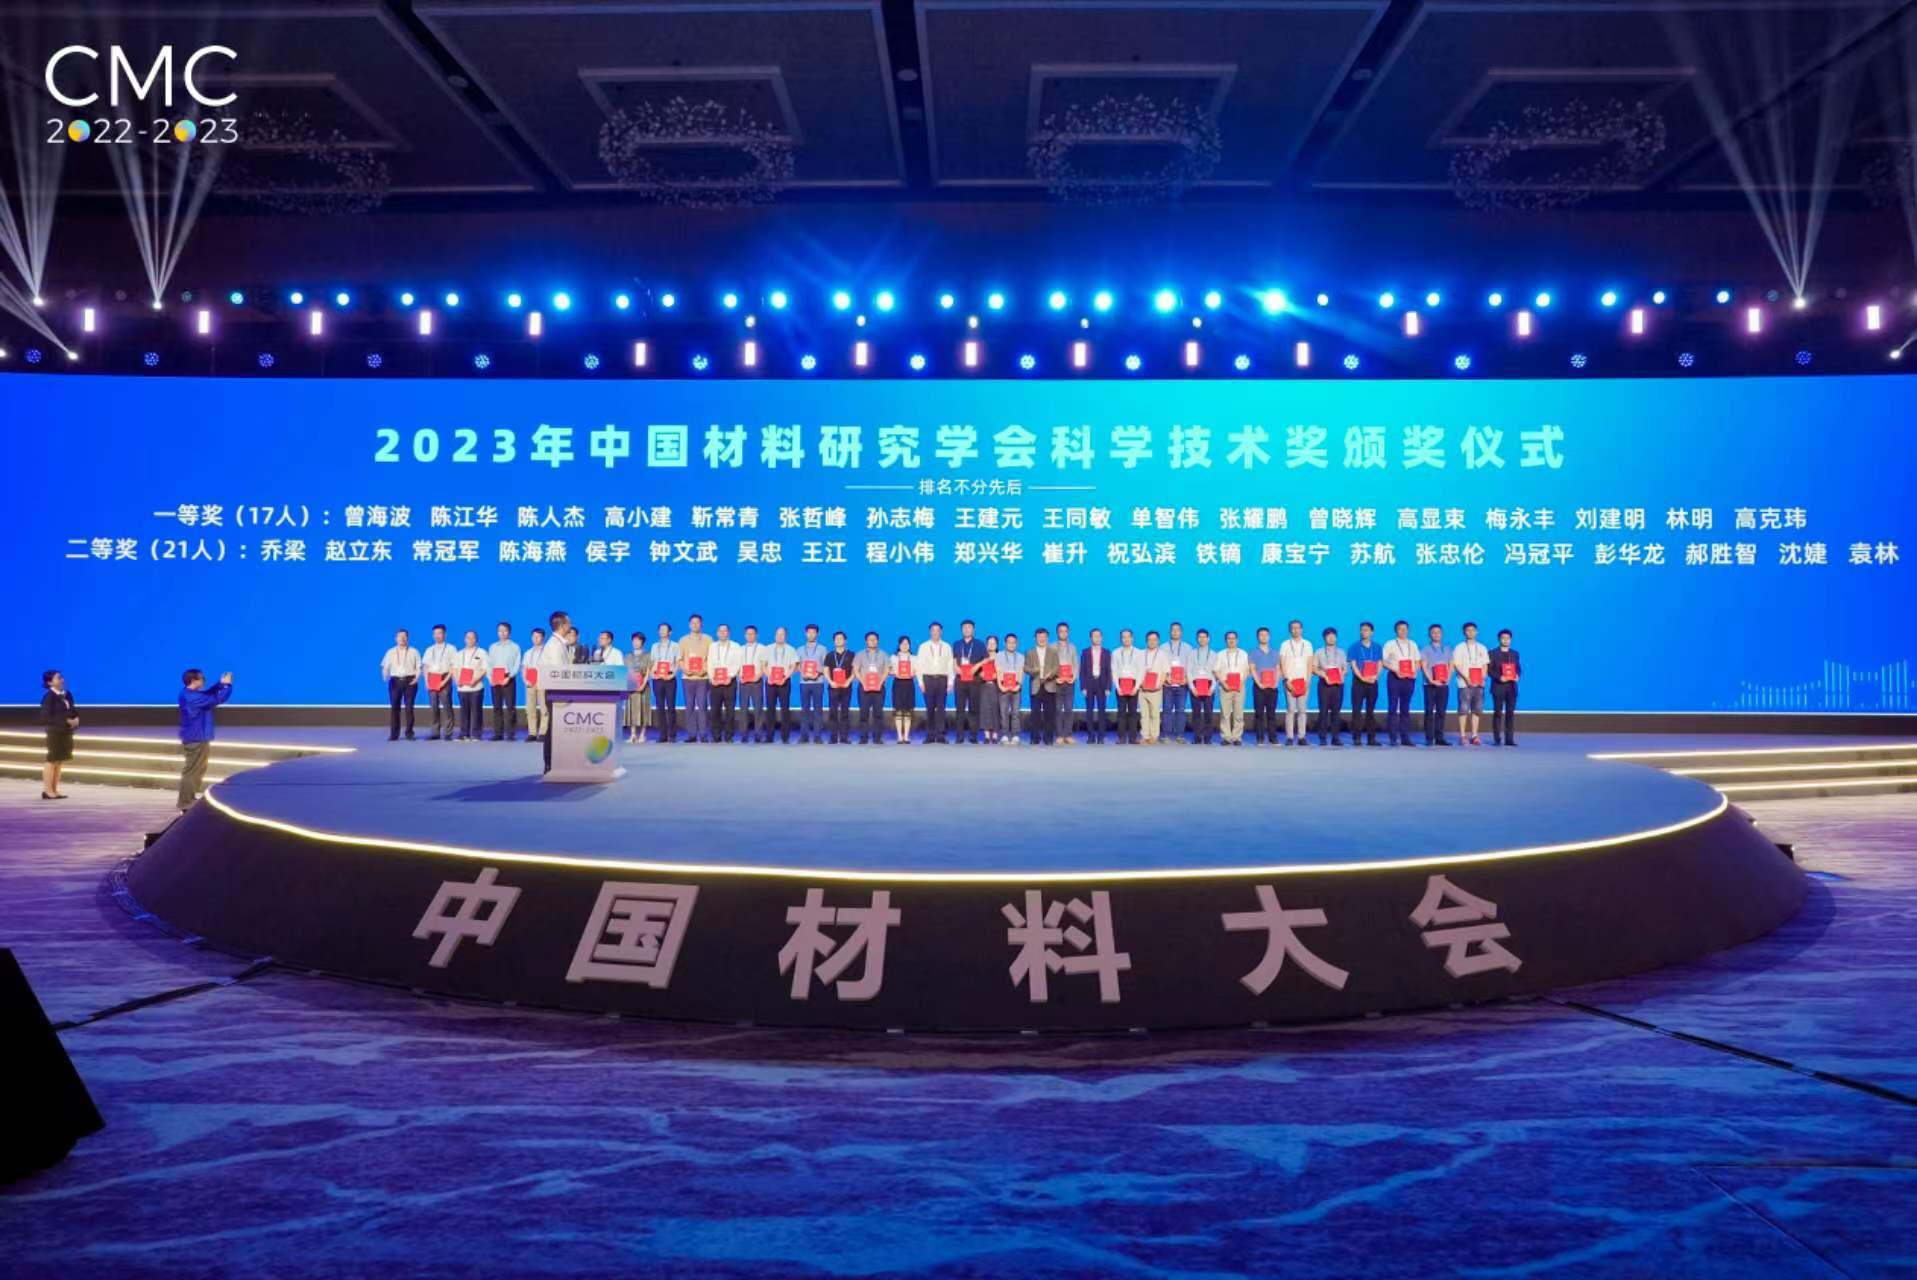 SUNRUI Wind Turbine Blade Corporation Wins First Prize of Science and Technology from Chinese Materials Research Society